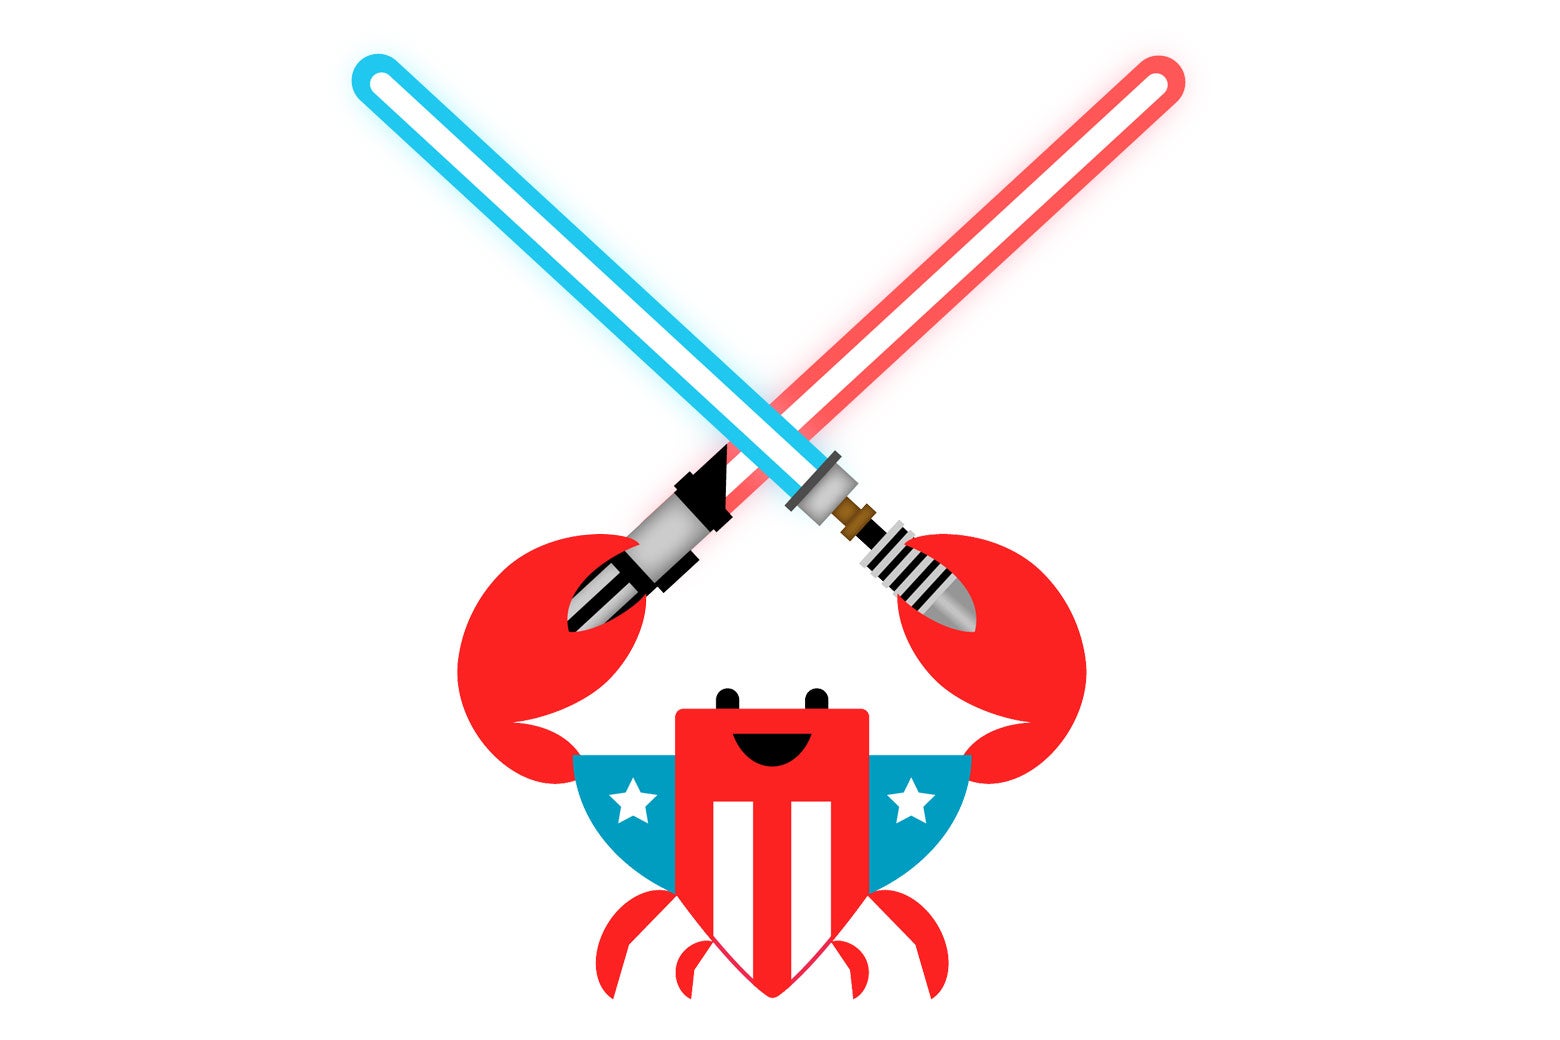 U.S. Digital Service A red, white, and blue crab bearing two crossing lightsabers